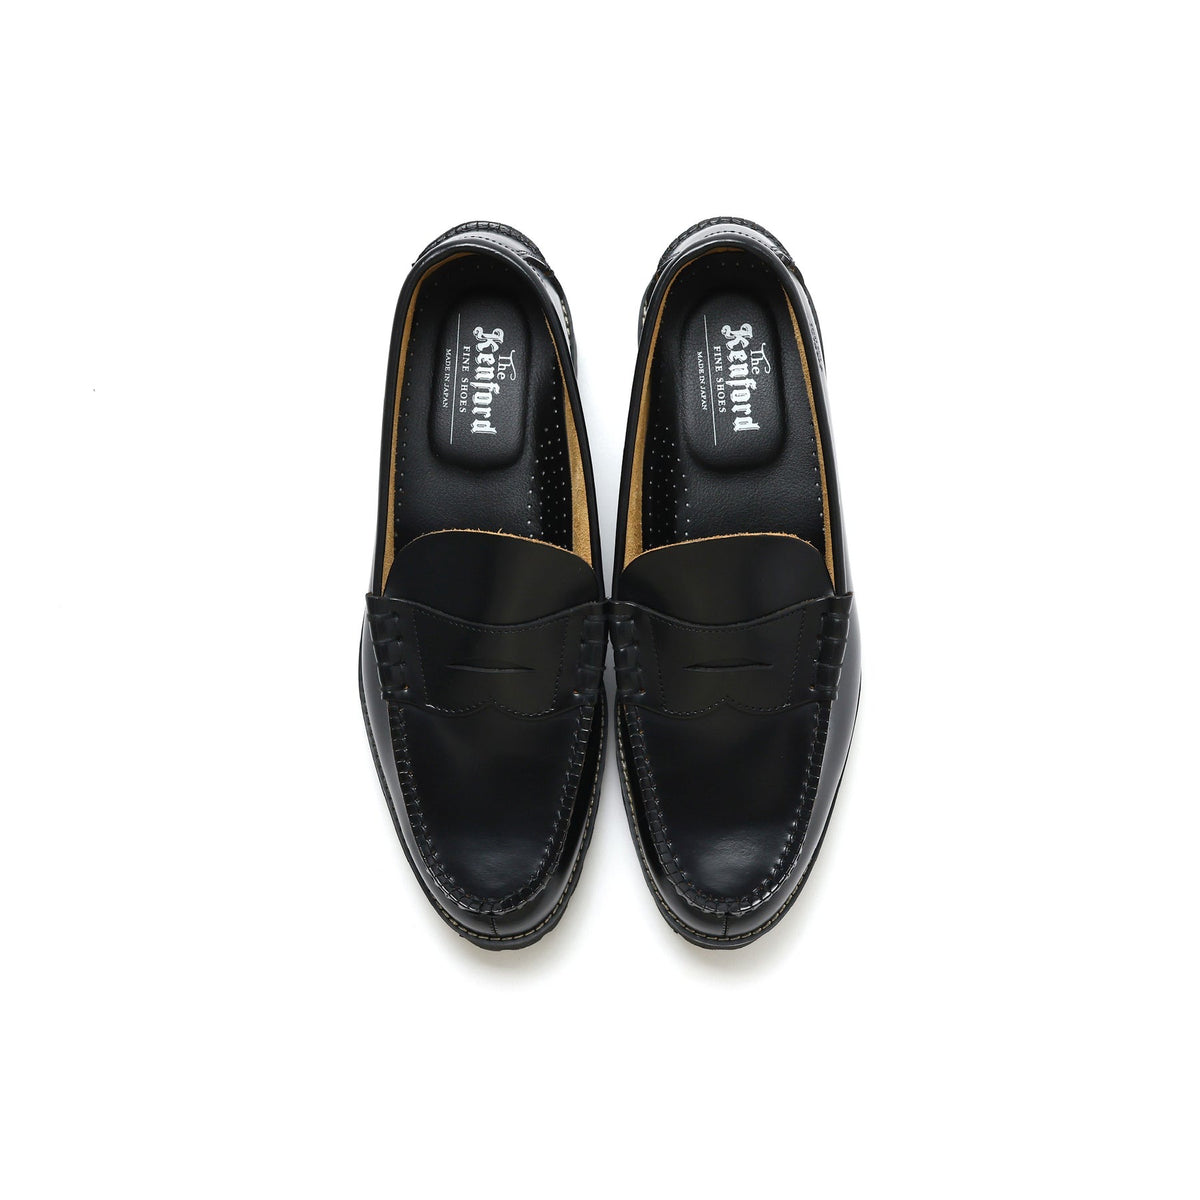 The Kenford Fineshoes】TANK SOLE LOAFERS Black – briwn